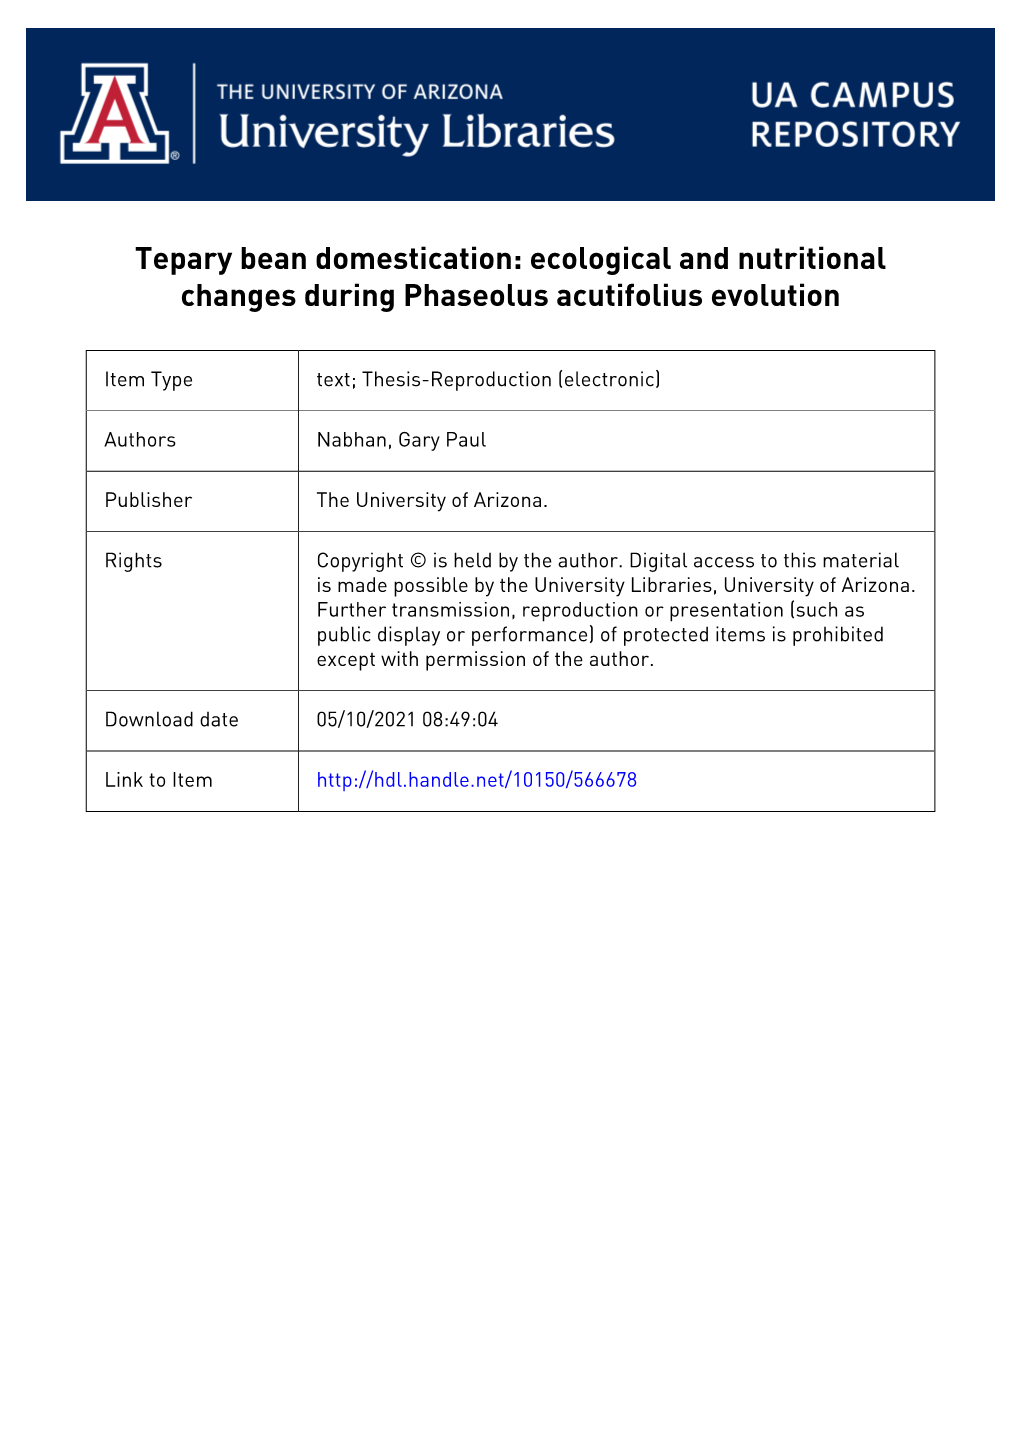 Tepary Bean Domestication: Ecological and Nutritional Changes During Phaseolus Acutifolius Evolution